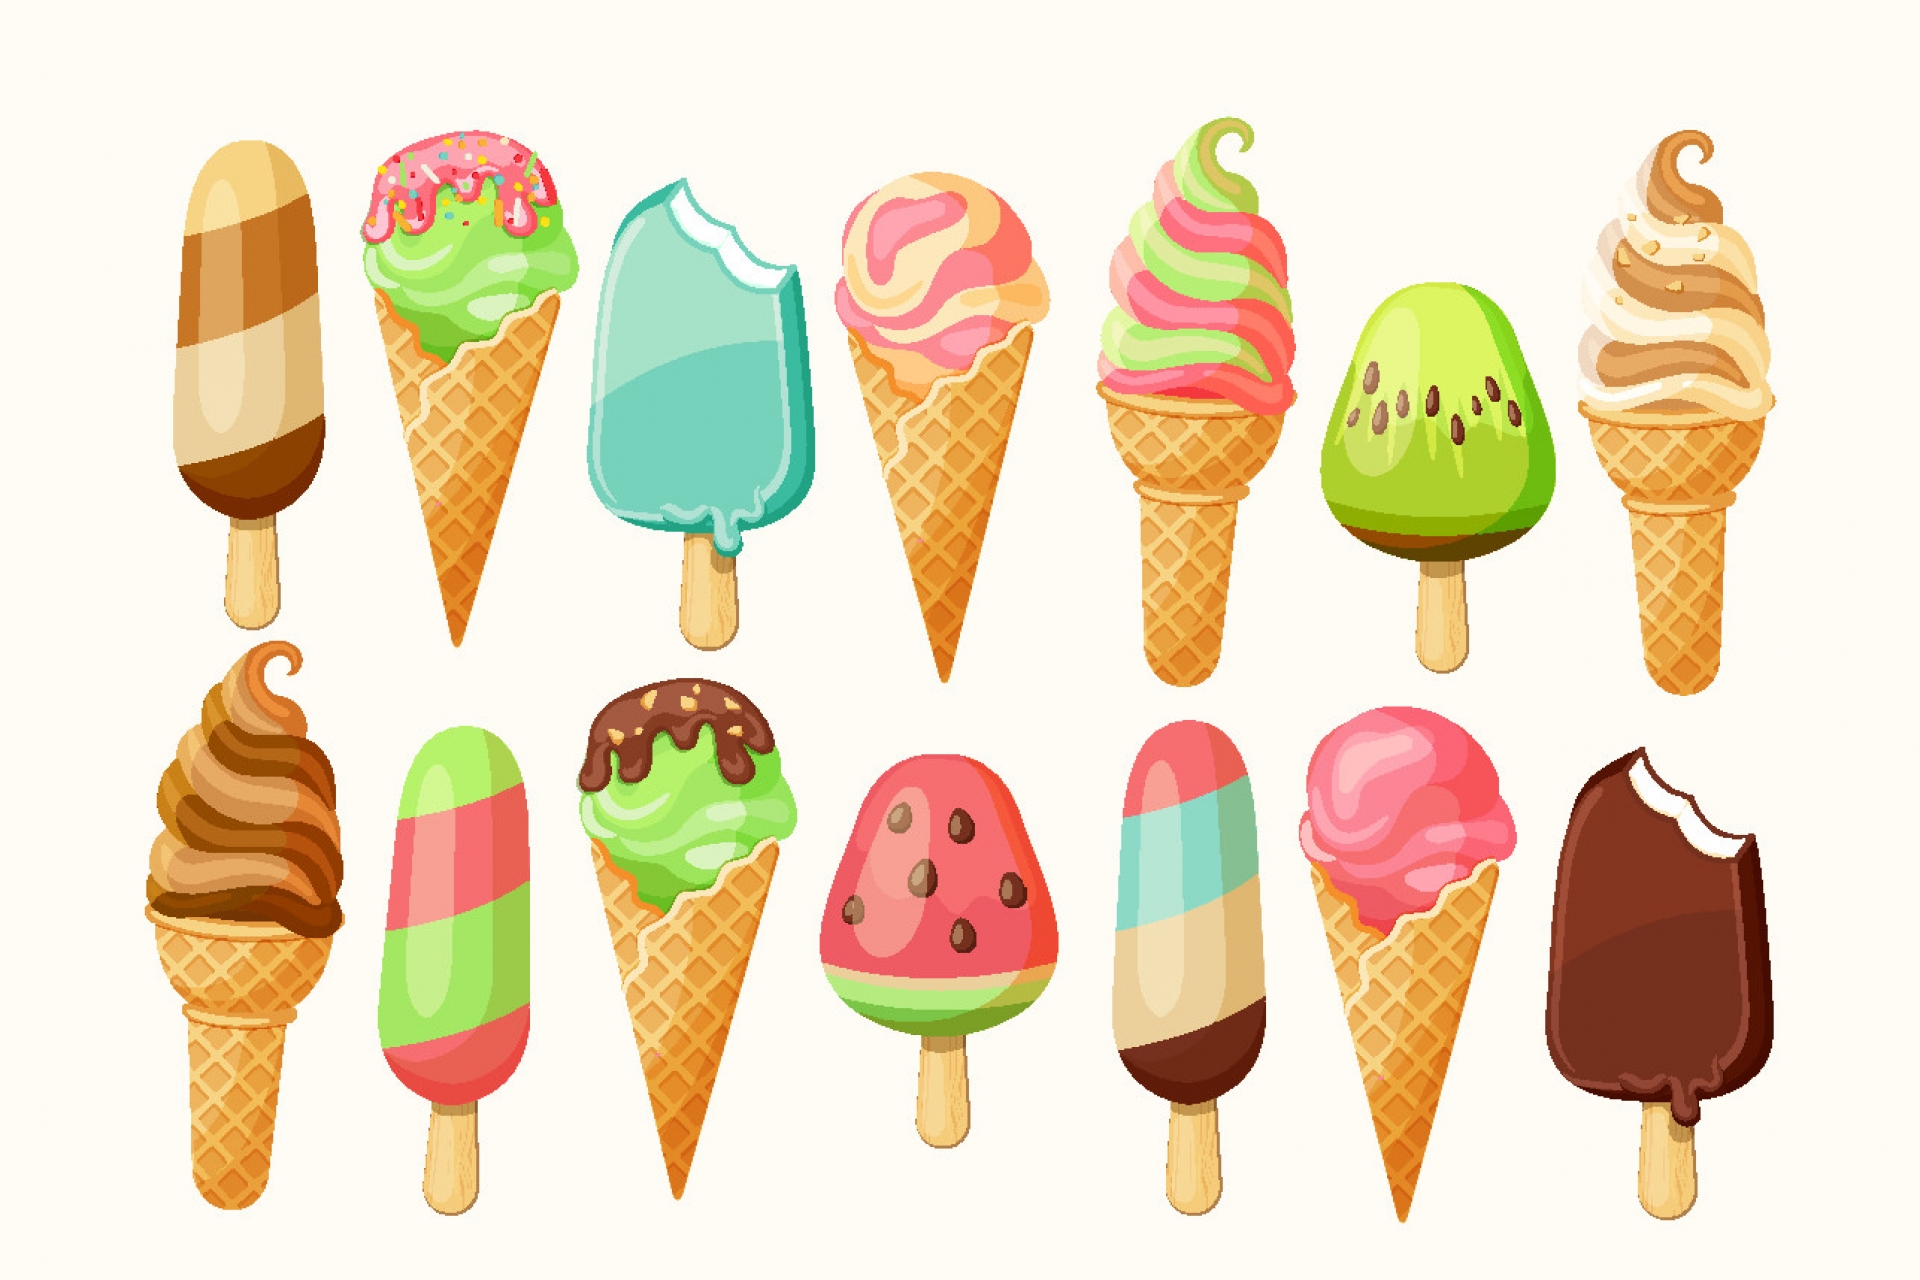 This heatwave, dive into 8 of our favourite children's books about ice cream